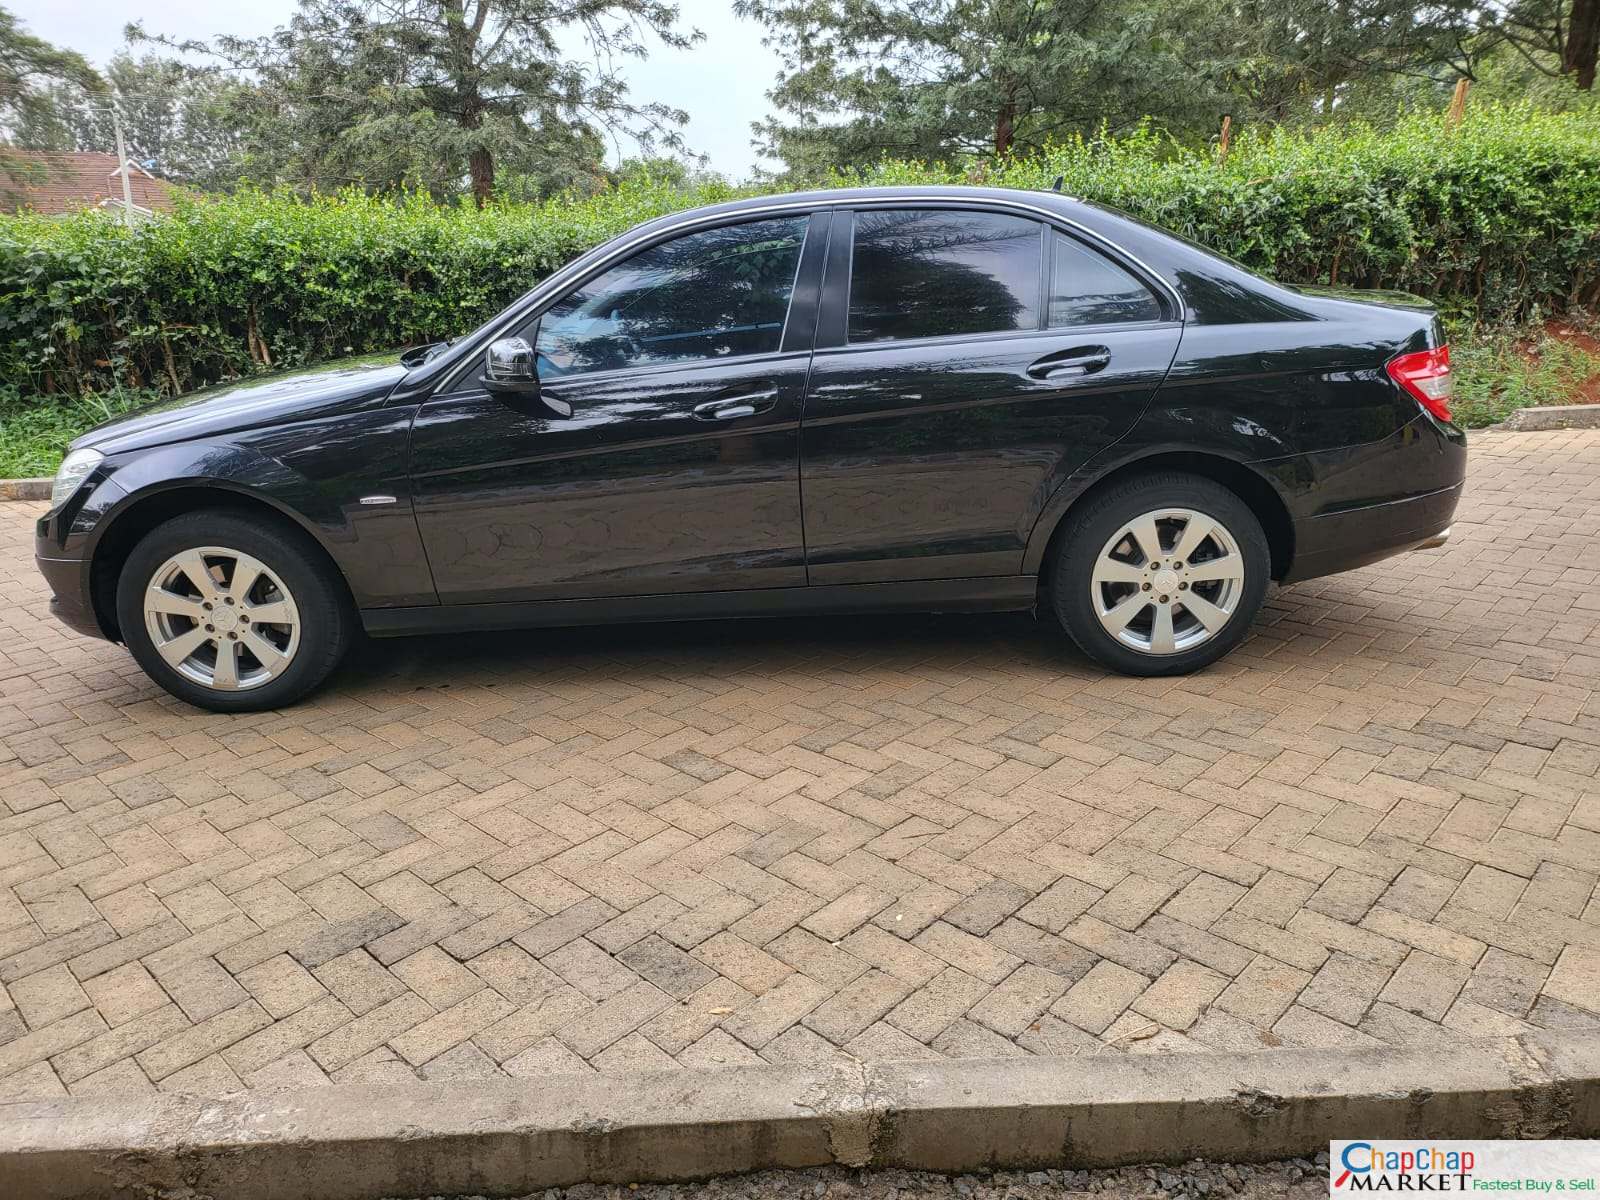 [Sub-categories]-Mercedes Benz C200 for sale in Kenya ðŸ”¥ You Pay 30% DEPOSIT Trade in OK EXCLUSIVE Hire Purchase 9